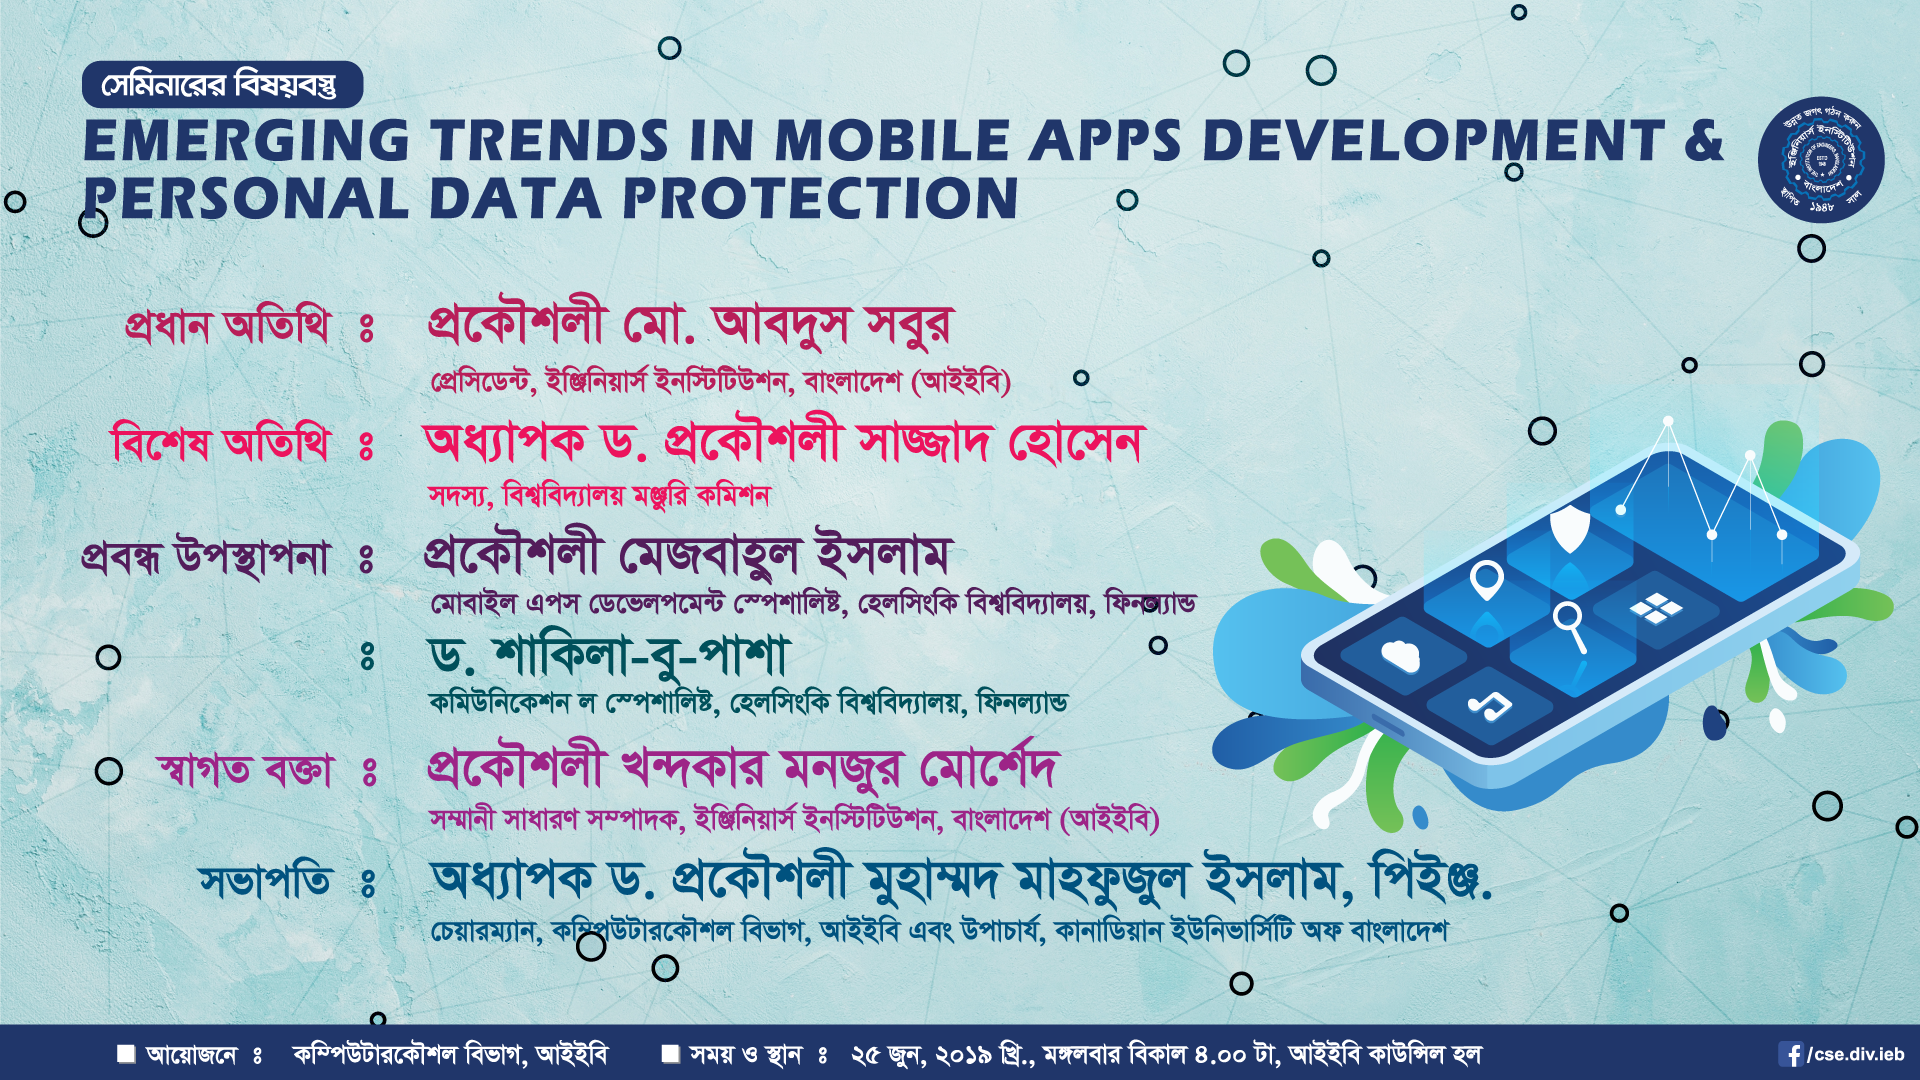 Seminar on: Emerging Trends in Mobile Apps Development & Personal Data Protection.